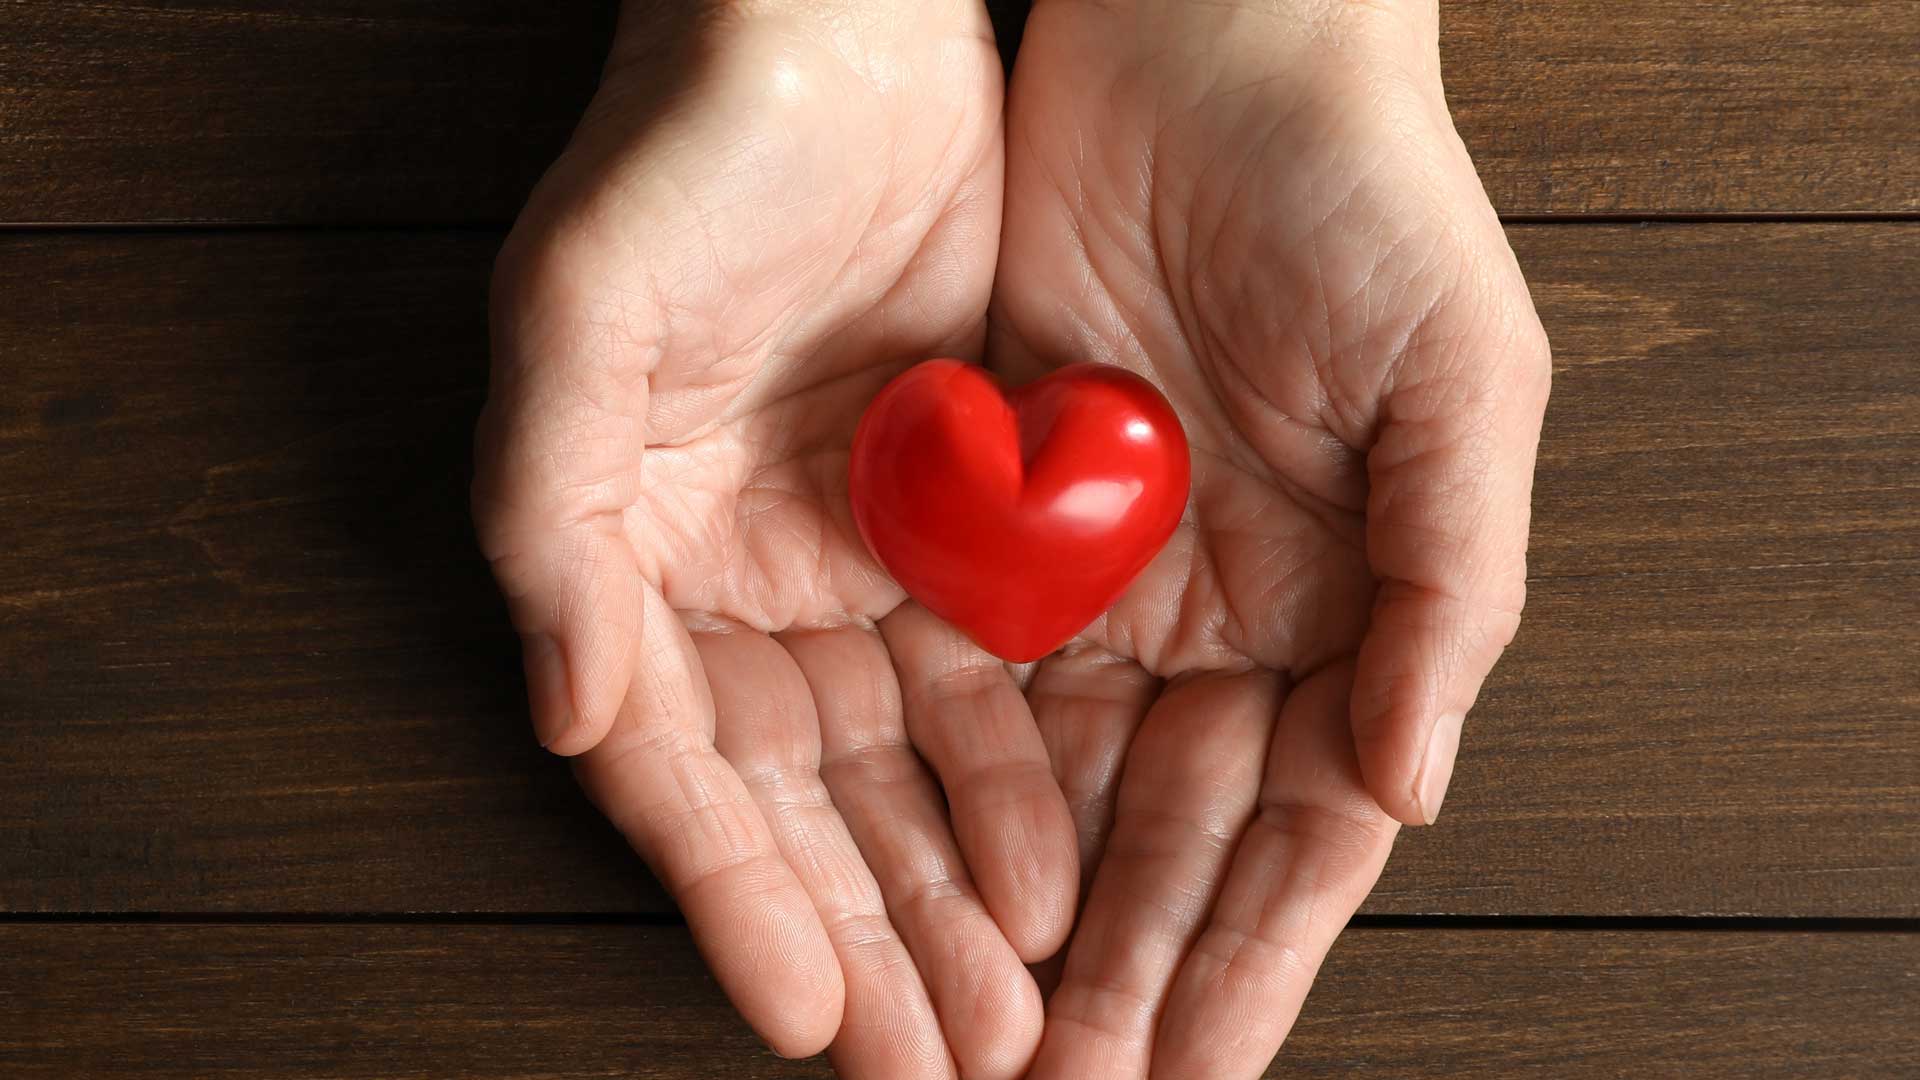 A pair of hands holding a red heart shape